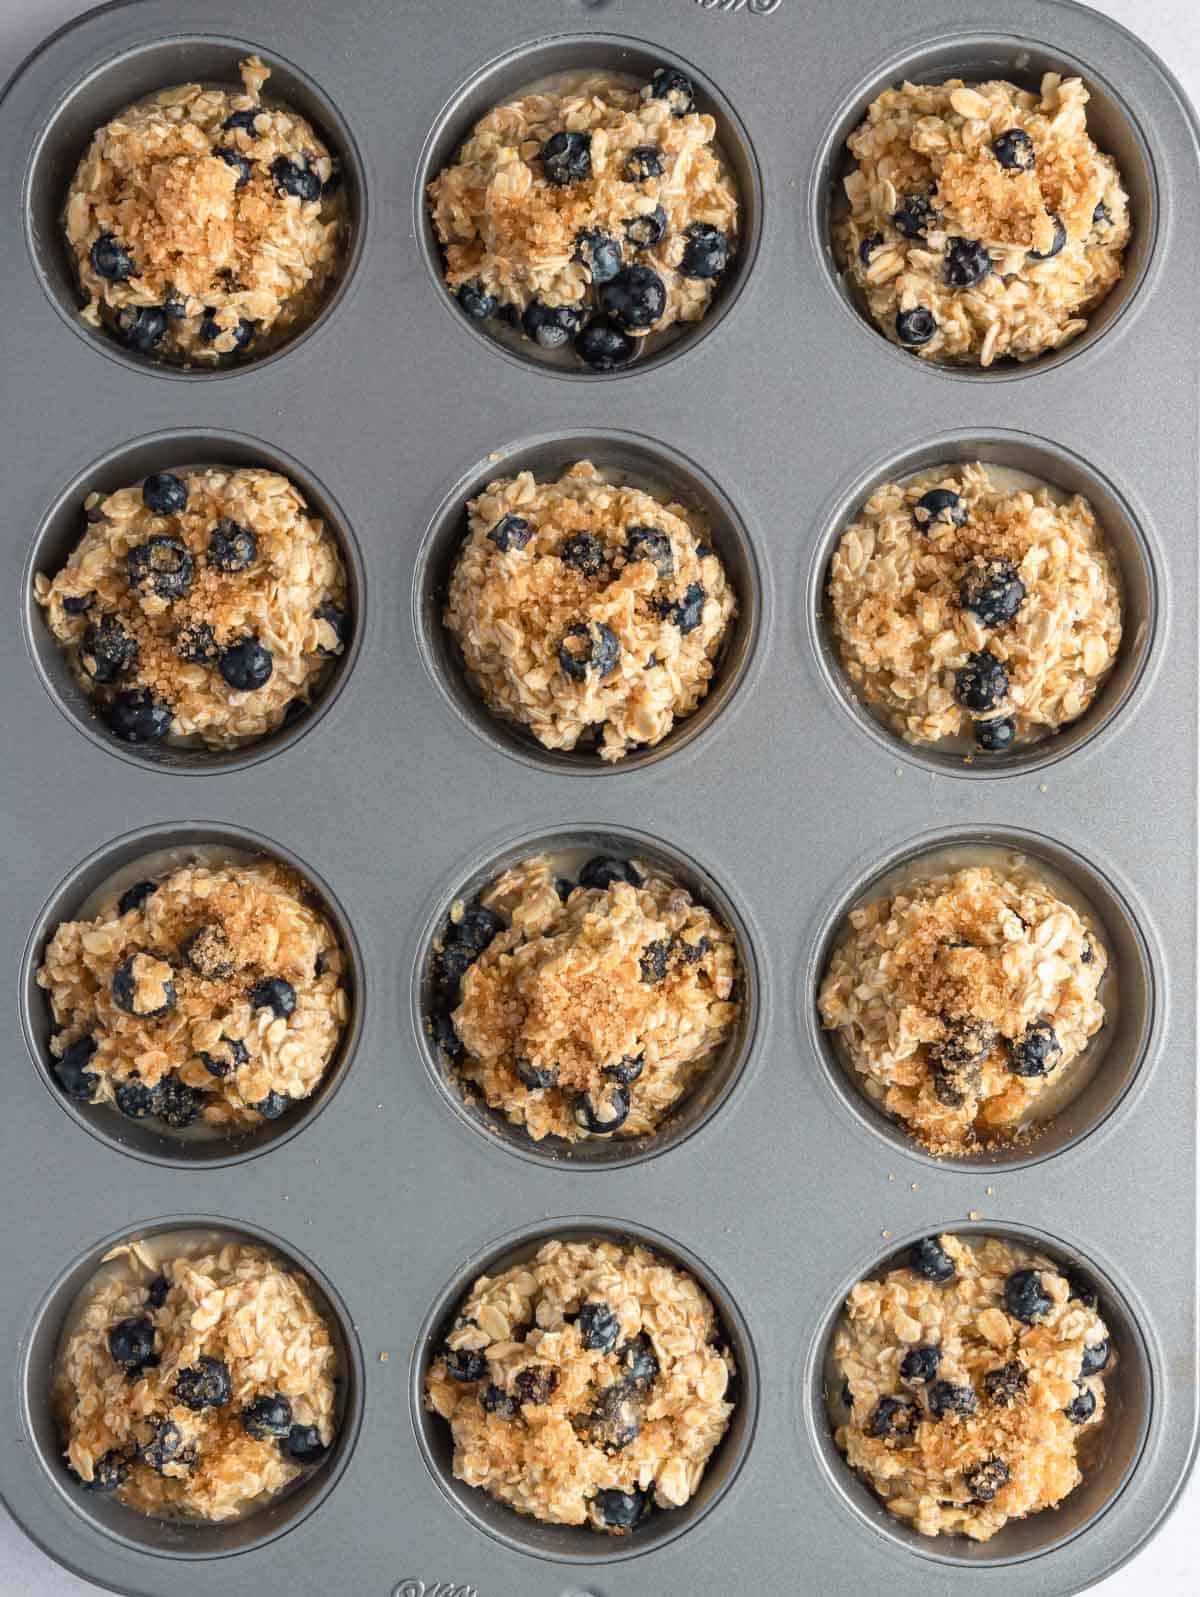 Oatmeal before being baked in a muffin tin.